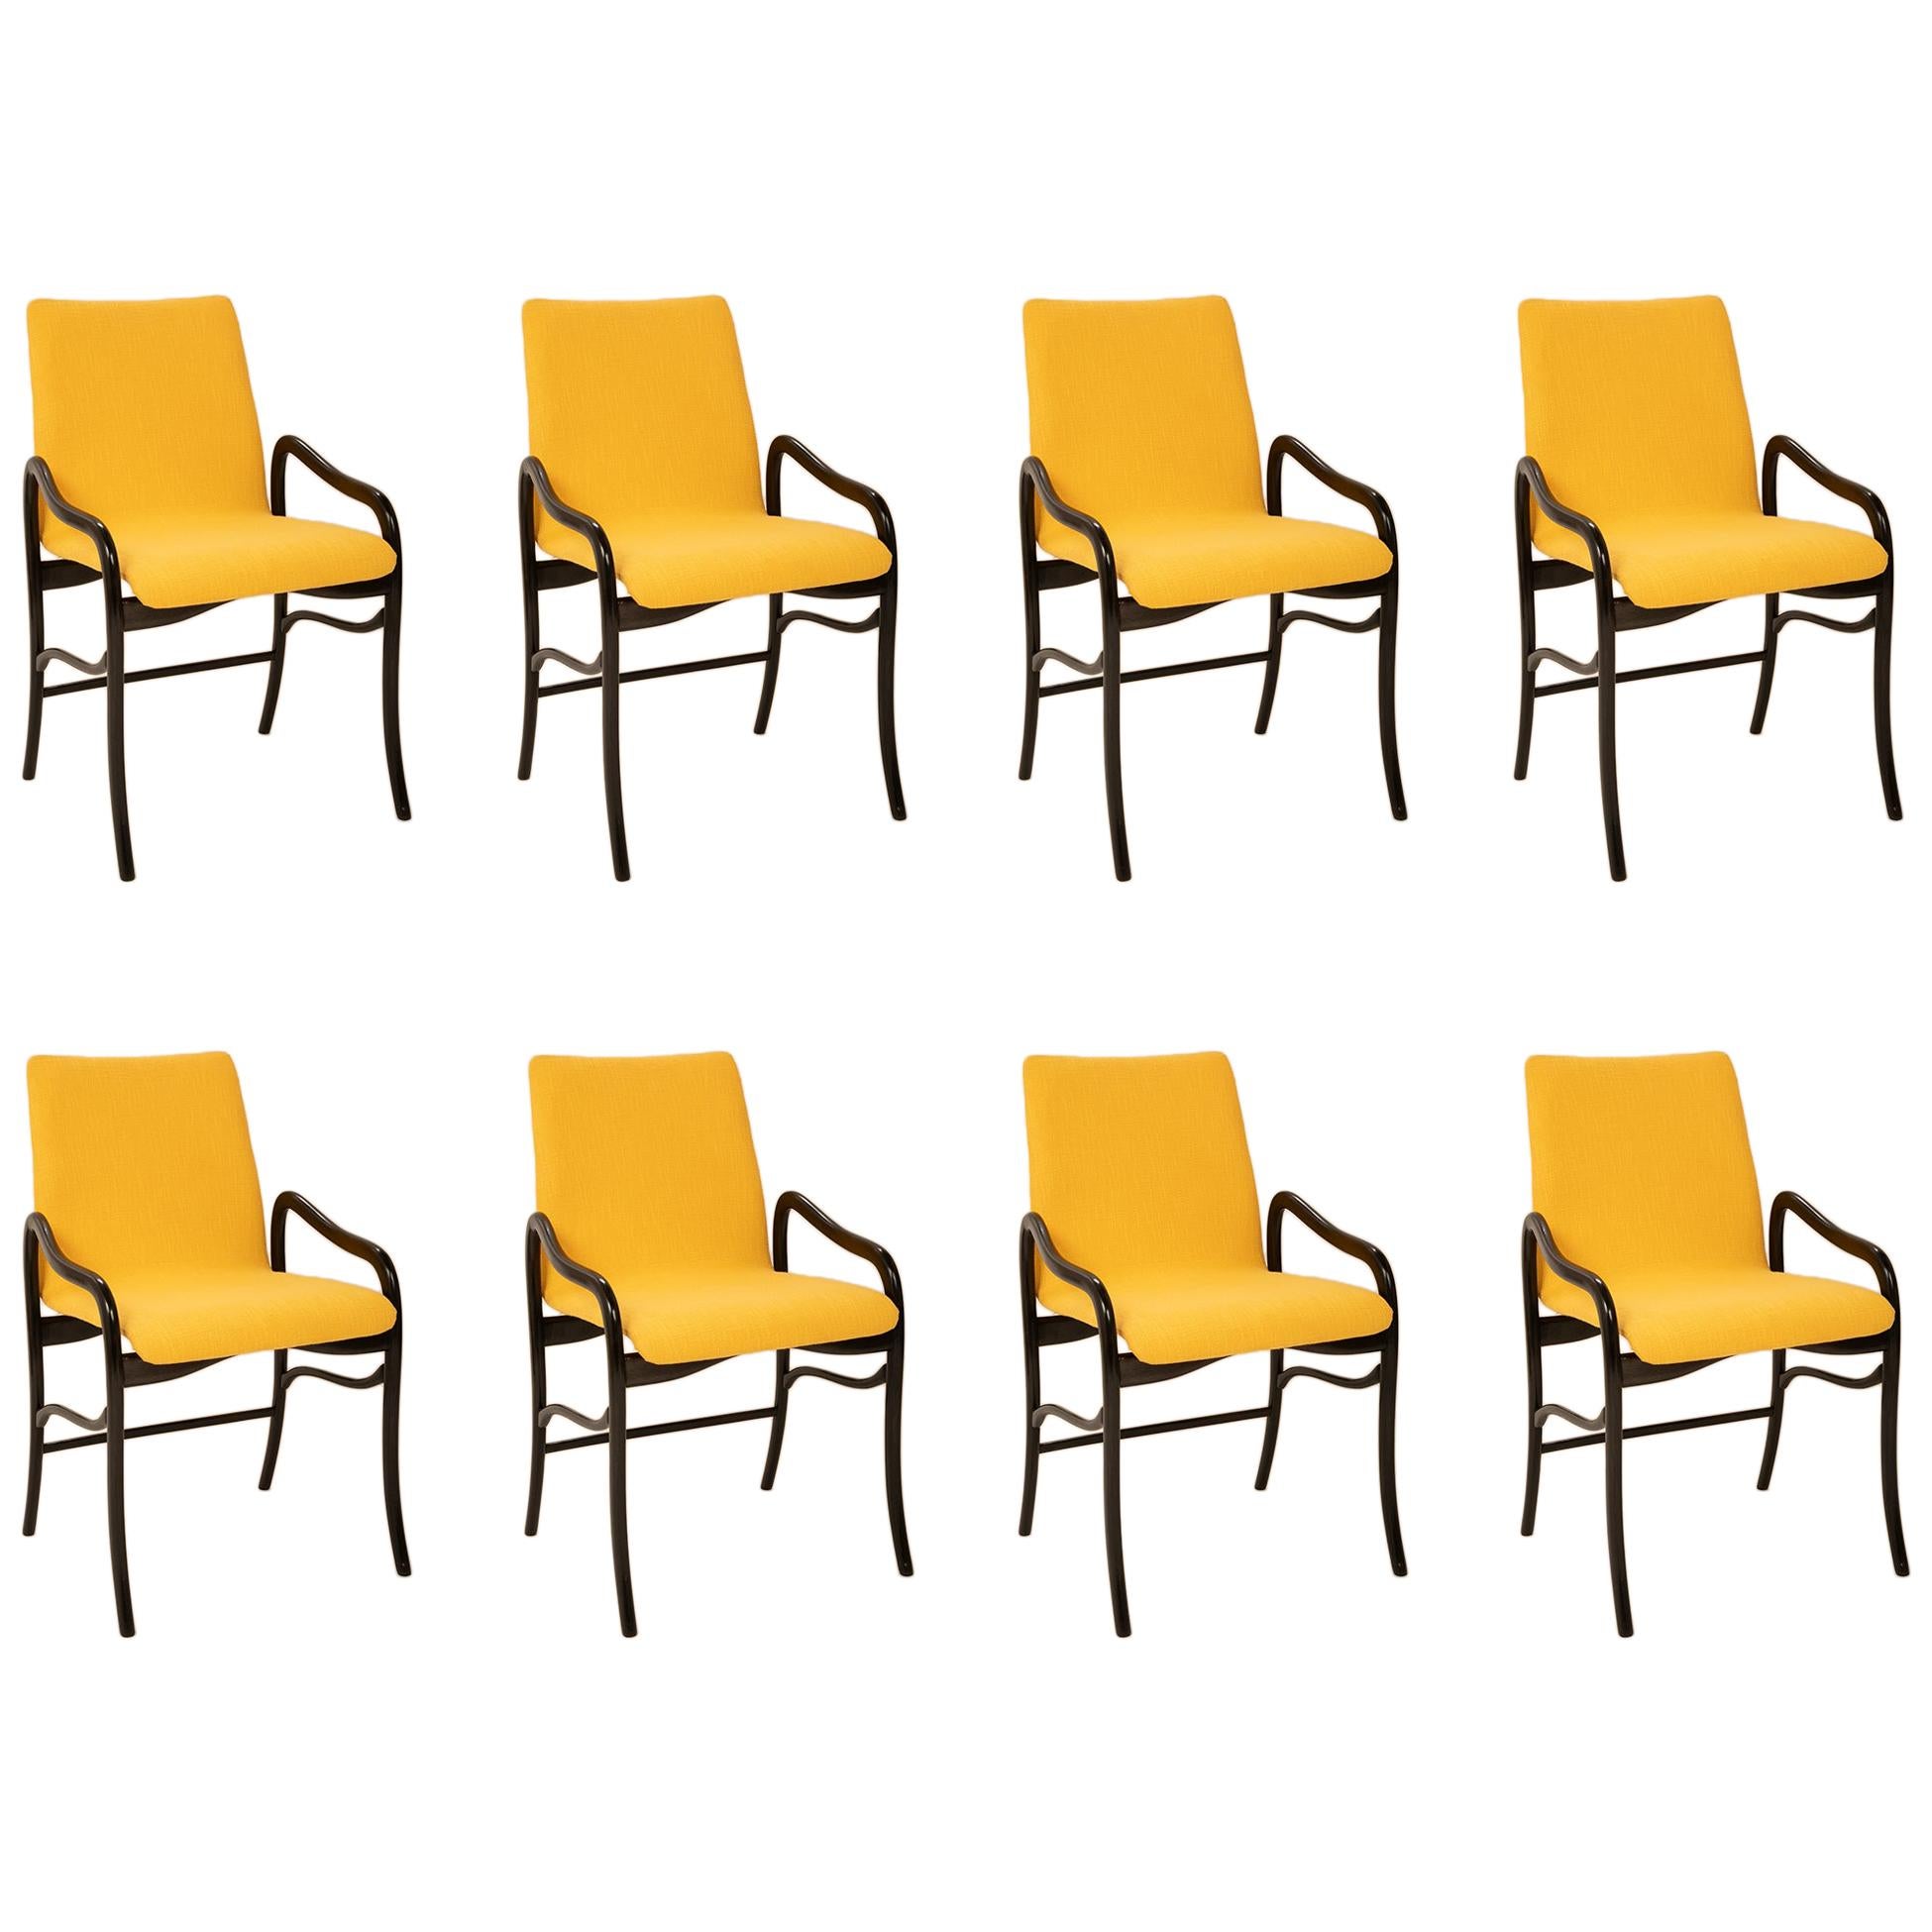 Set of 8 Sculptural Italian Dining Chairs Attributed to Malatesta & Mason For Sale